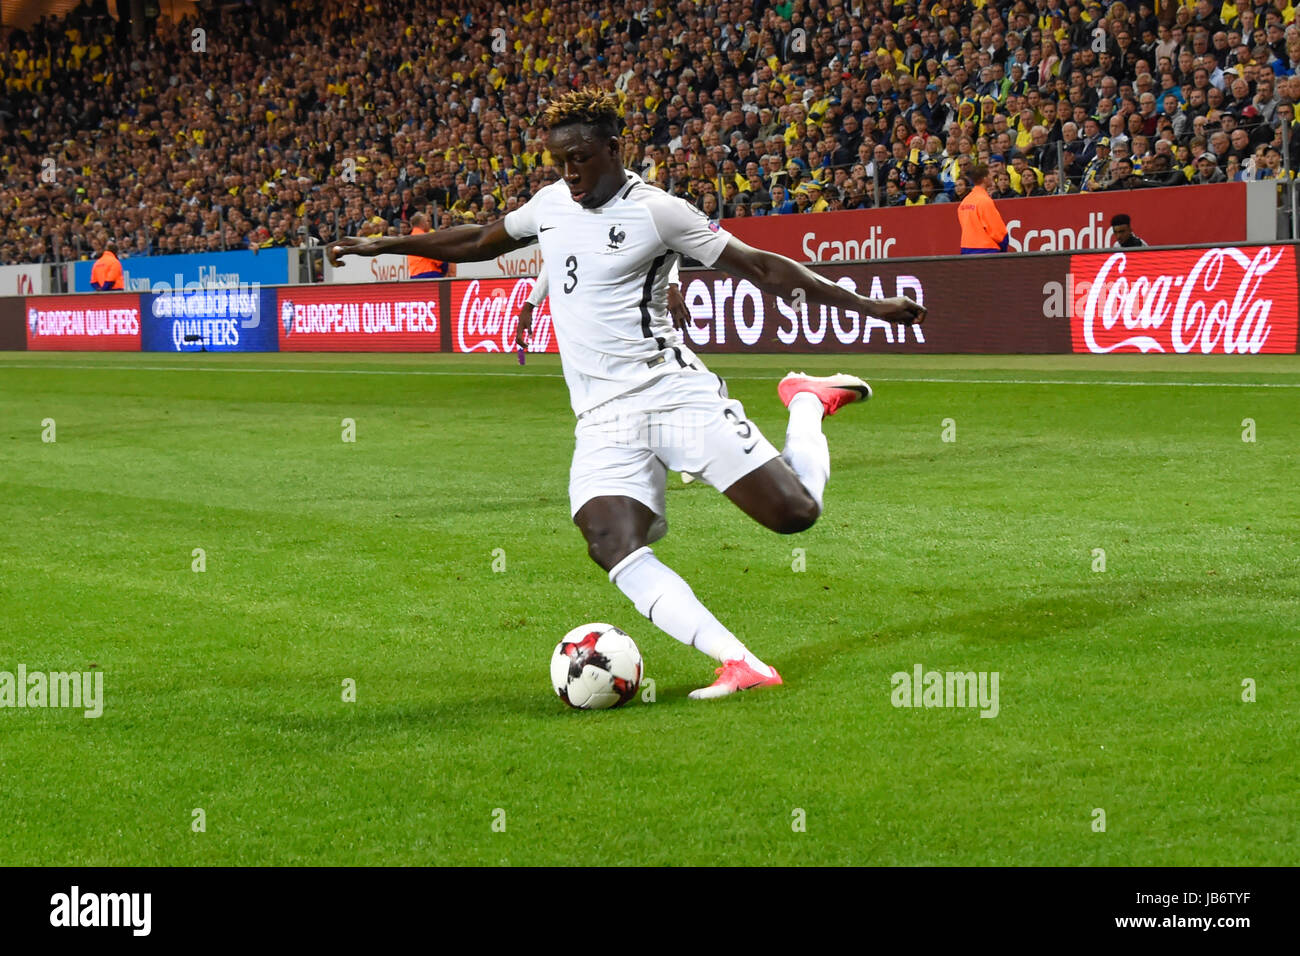 Stockholm, Sweden. 9th june, 2017. France 3 Benjamin Mendy in the FIFA World Cup™ Qualifiers game between Sweden and France. Credit: Bror Persson/Frilansfotograferna/Alamy Live News Stock Photo